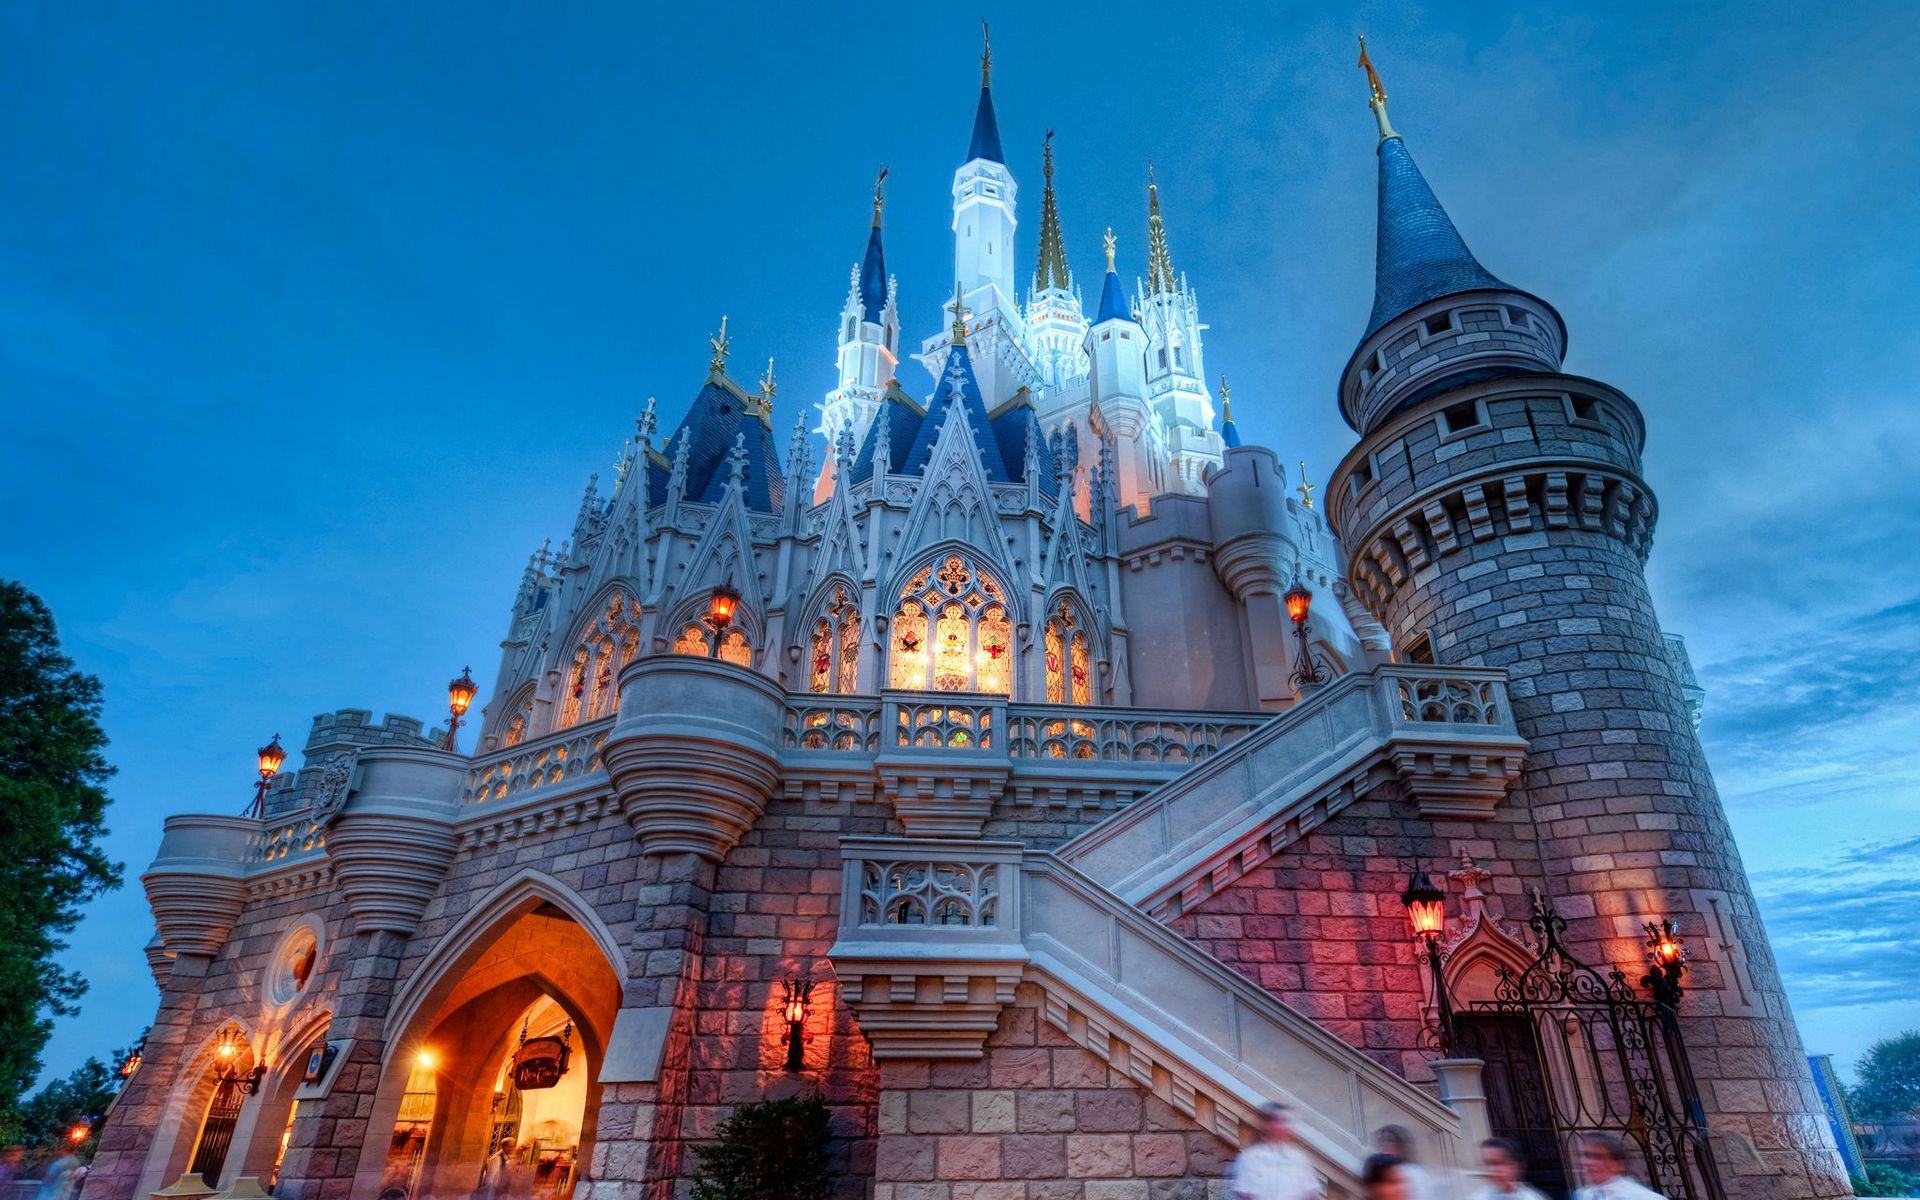 A night view of the castle at Disney World. - Disneyland